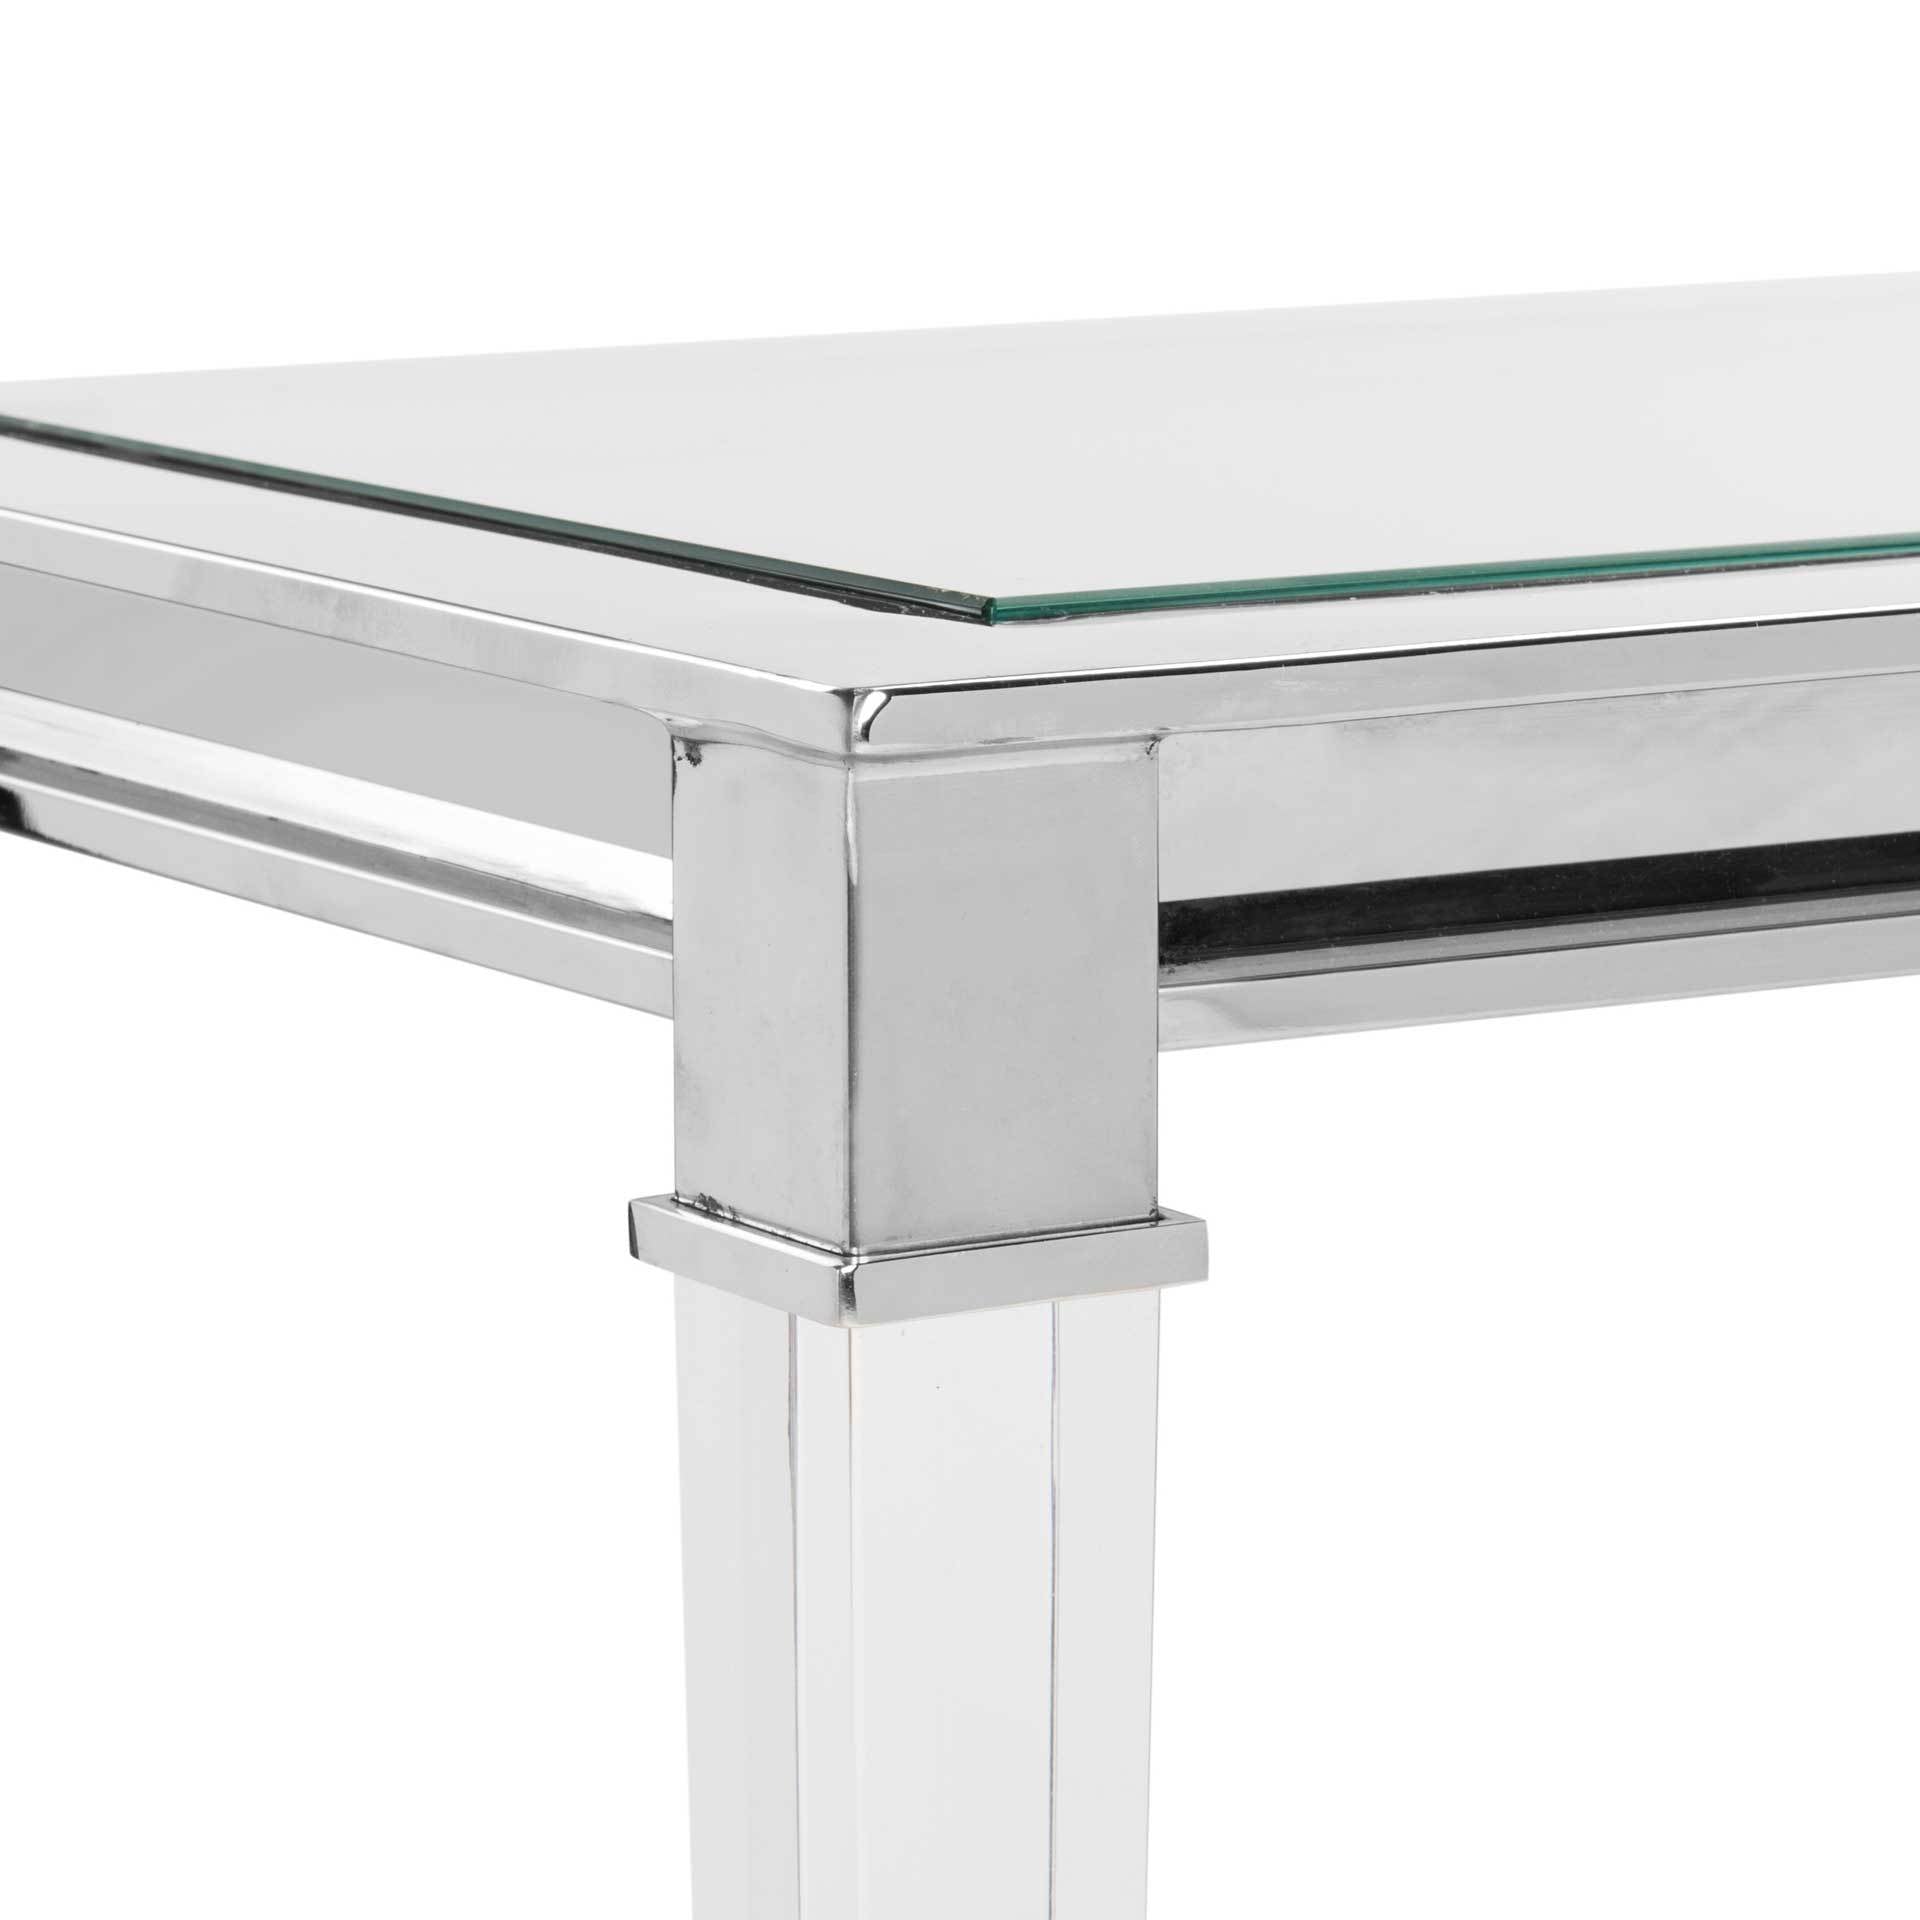 Channing Console Table Silver